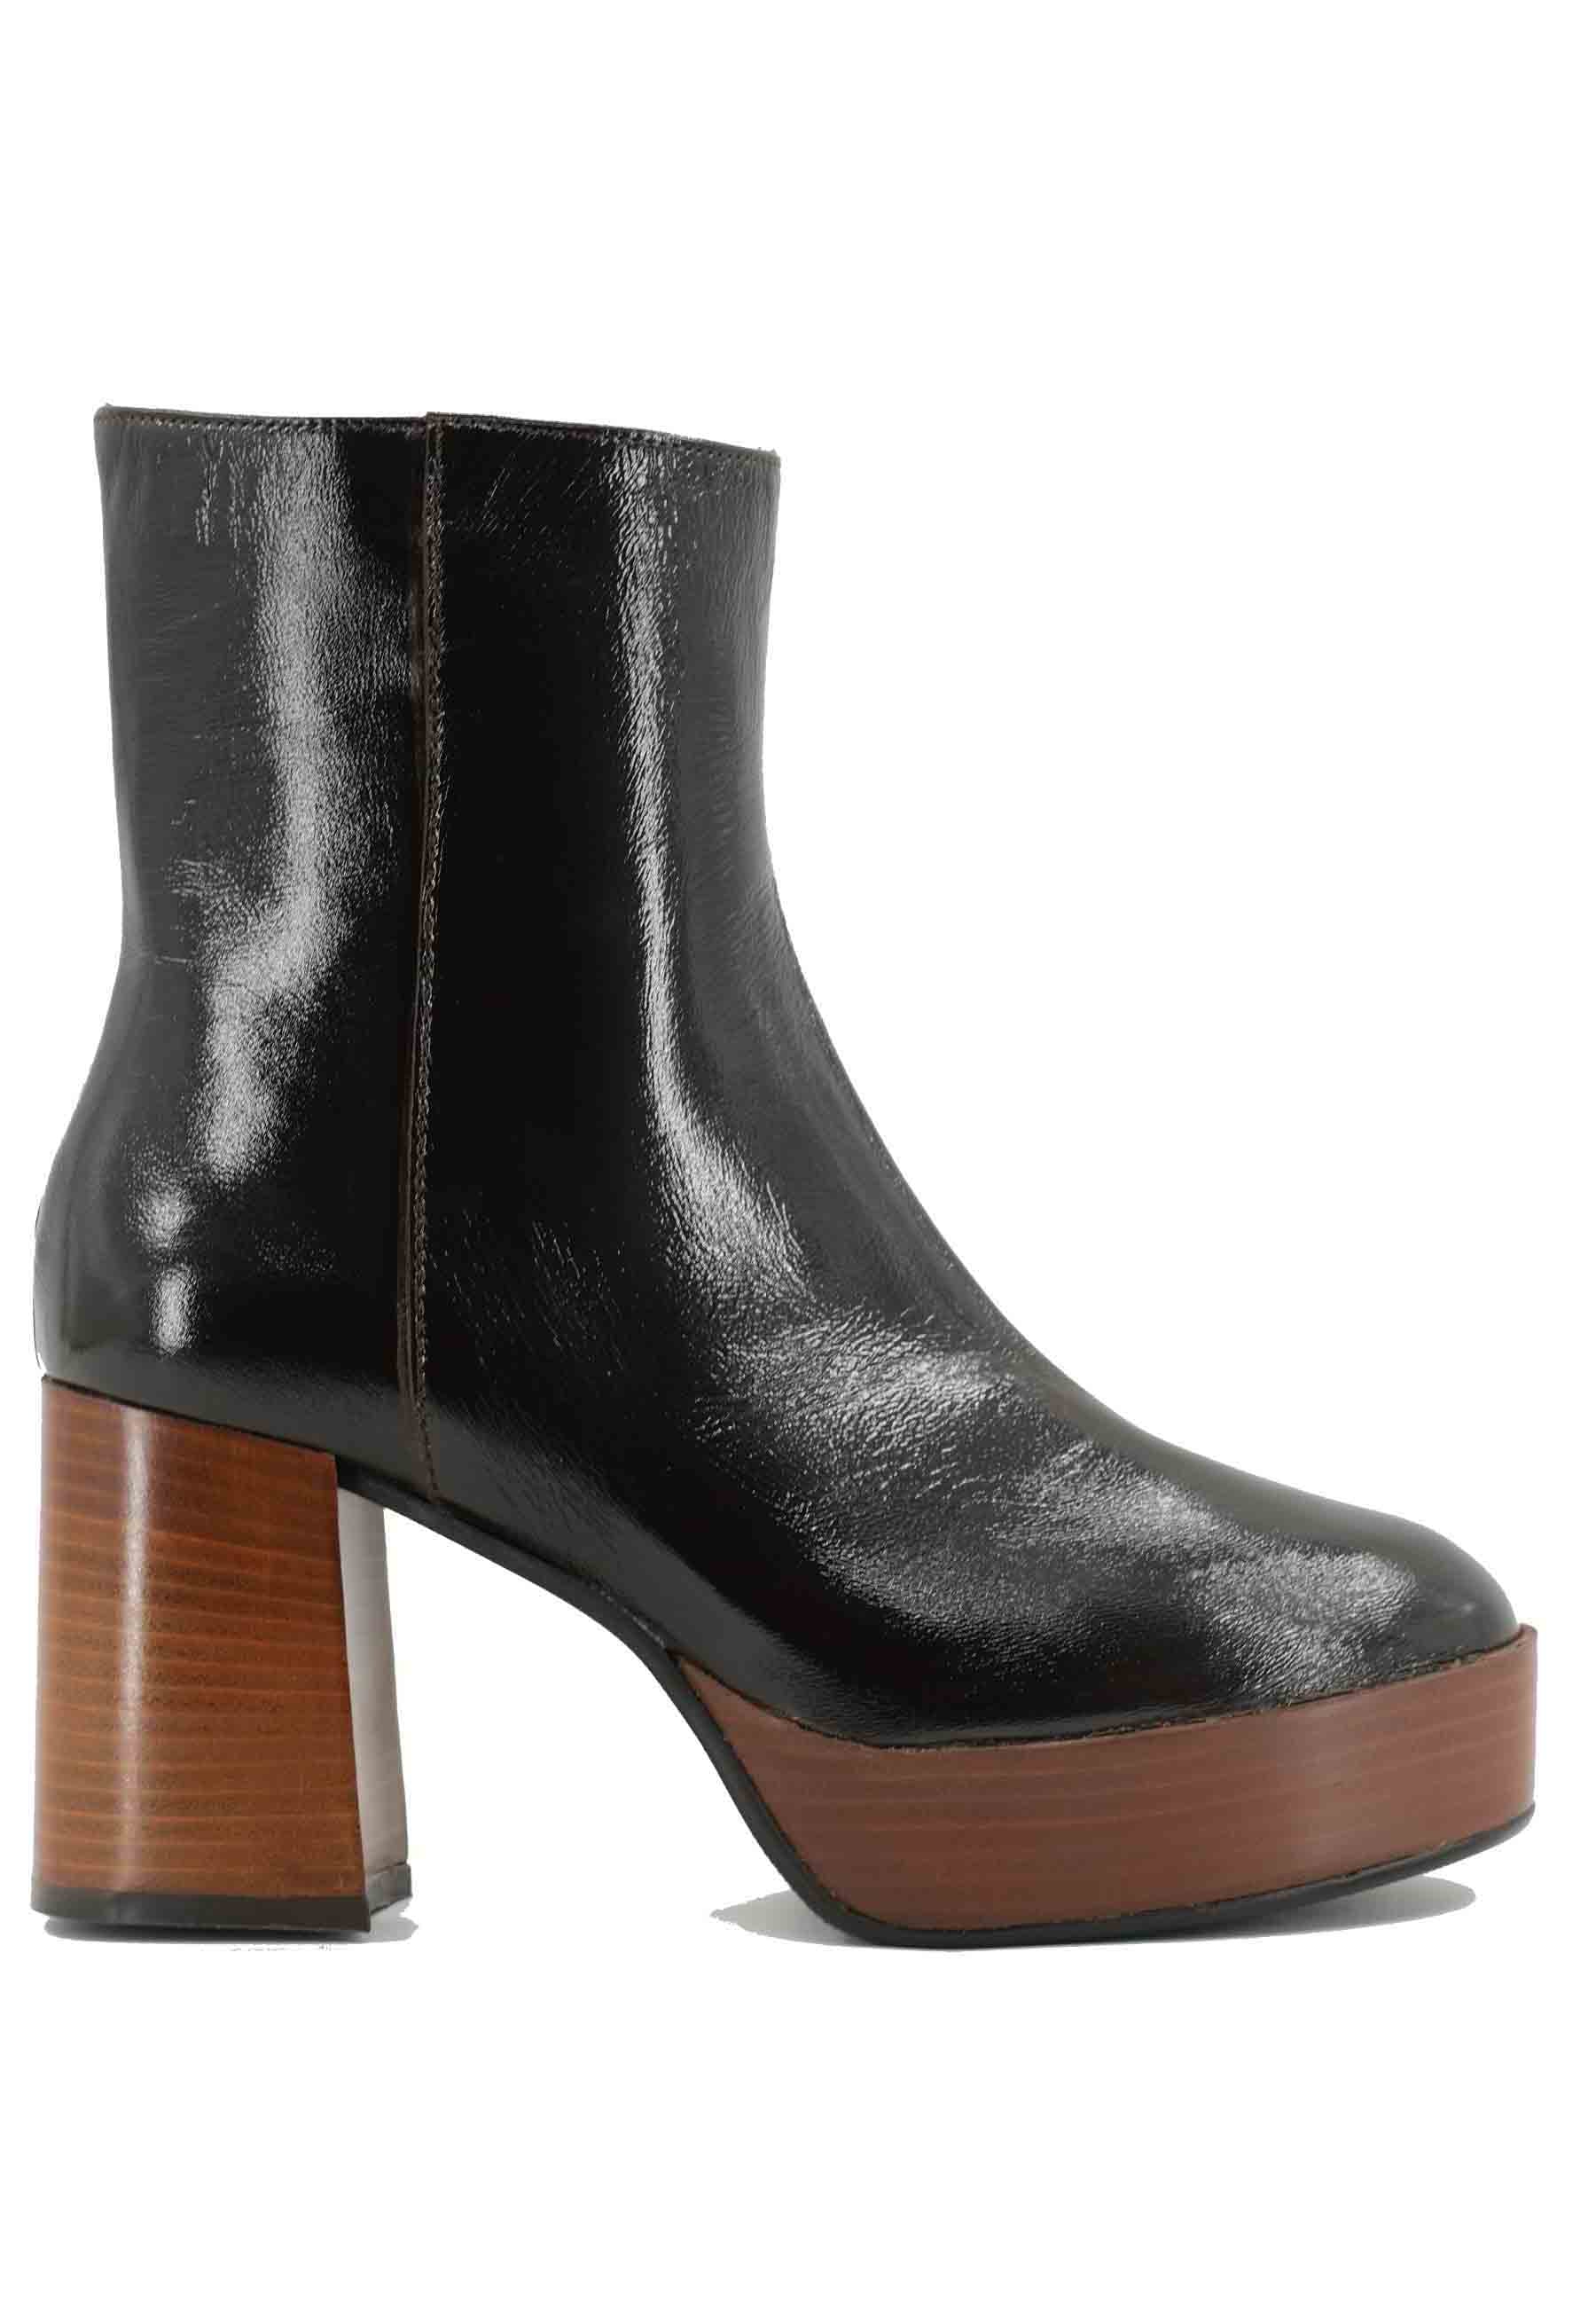 TR1556 ankle boots in dark brown leather with high heel and platform with side zip closure